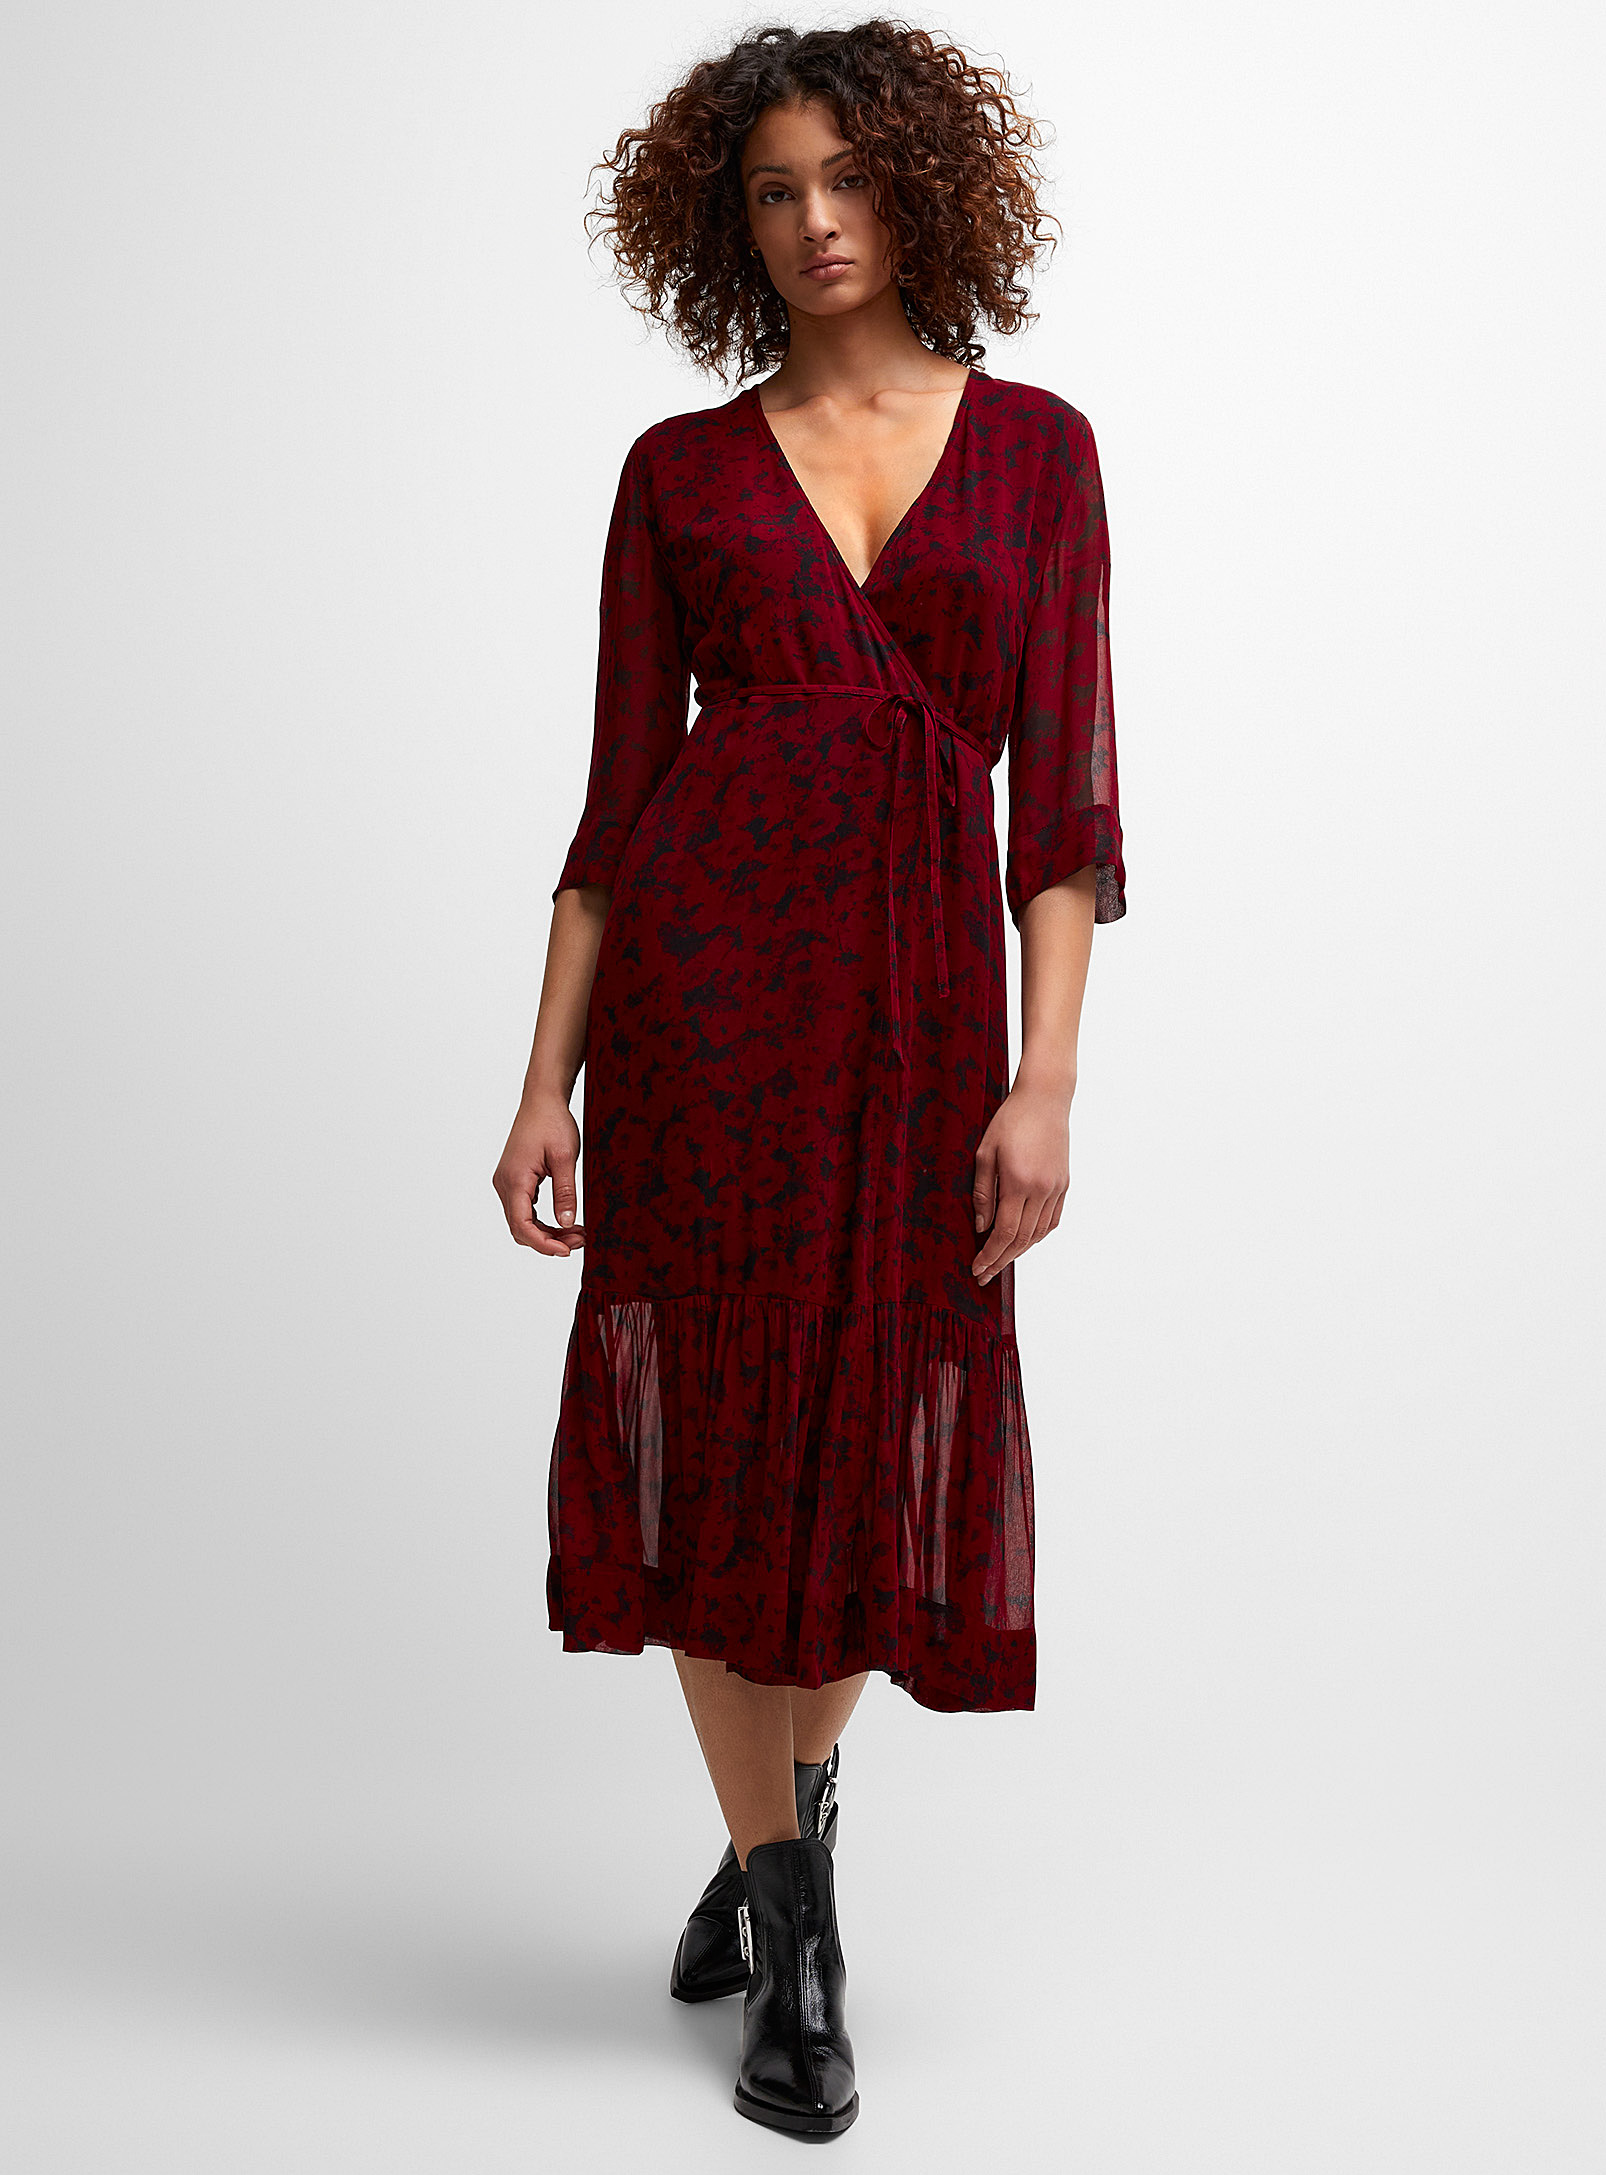 Ganni Flower Crossover Dress In Patterned Red